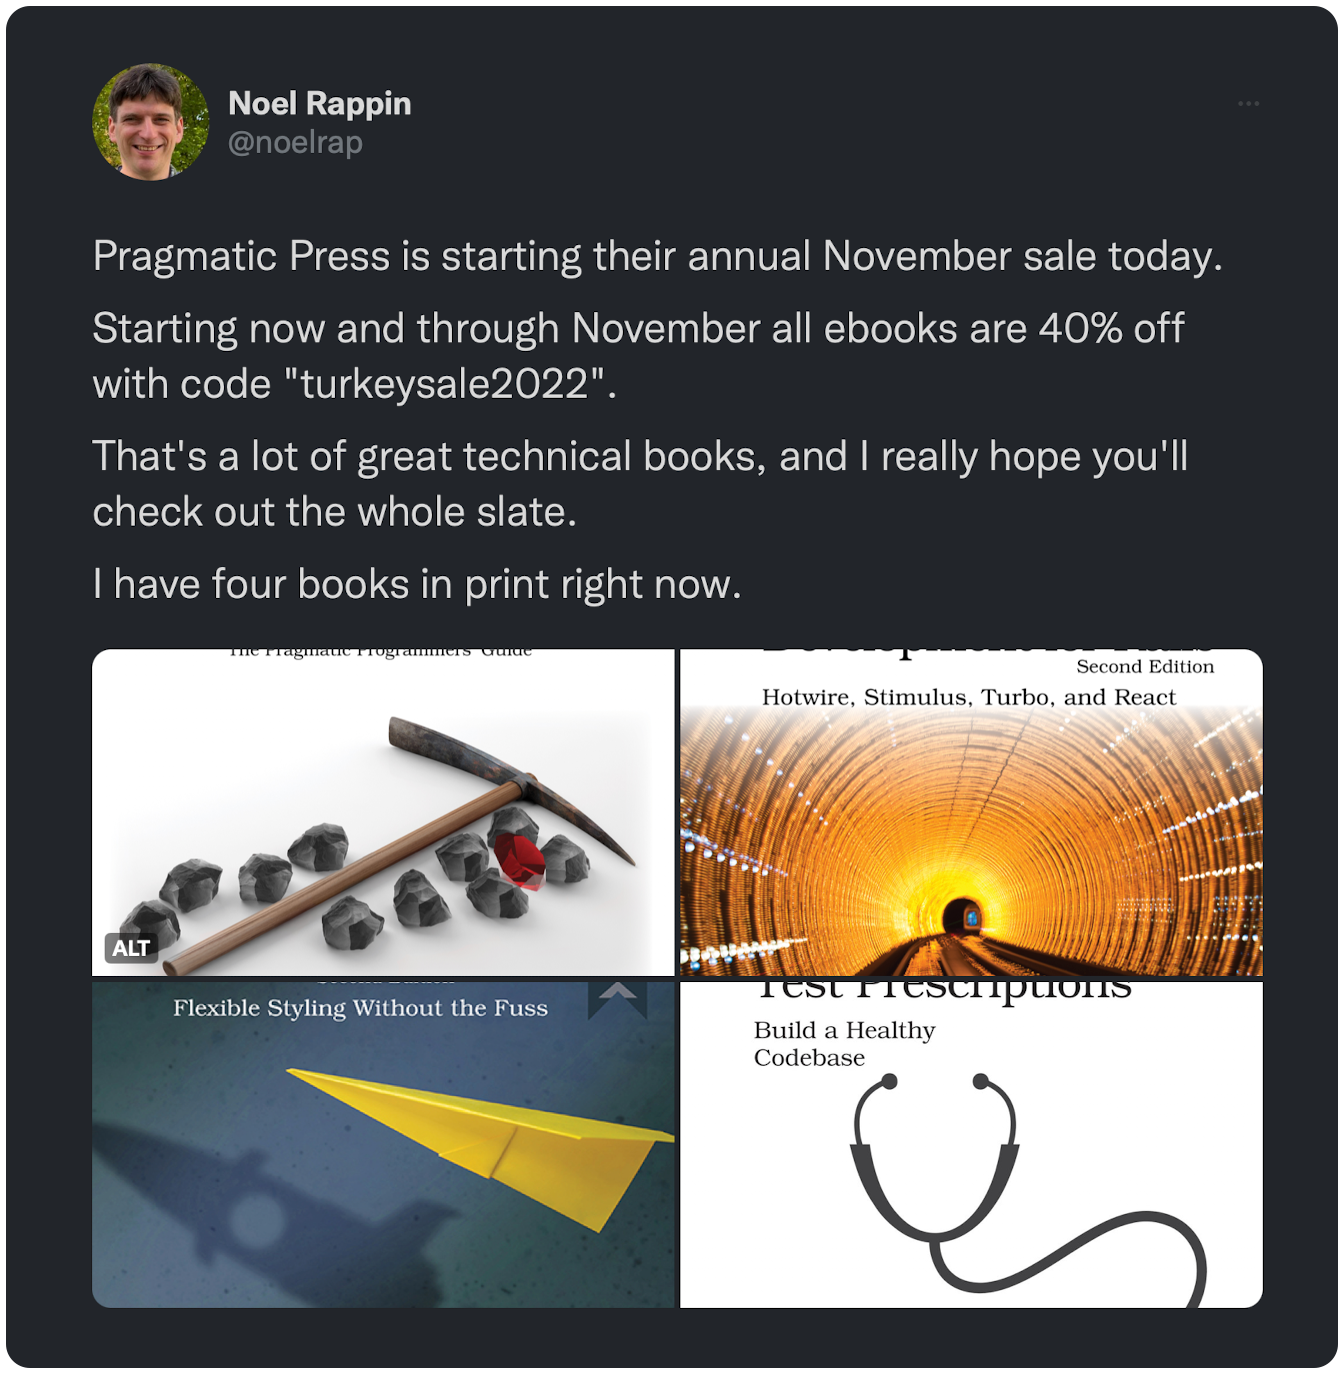 Pragmatic Press is starting their annual November sale today.  Starting now and through November all ebooks are 40% off with code "turkeysale2022".  That's a lot of great technical books, and I really hope you'll check out the whole slate.  I have four books in print right now